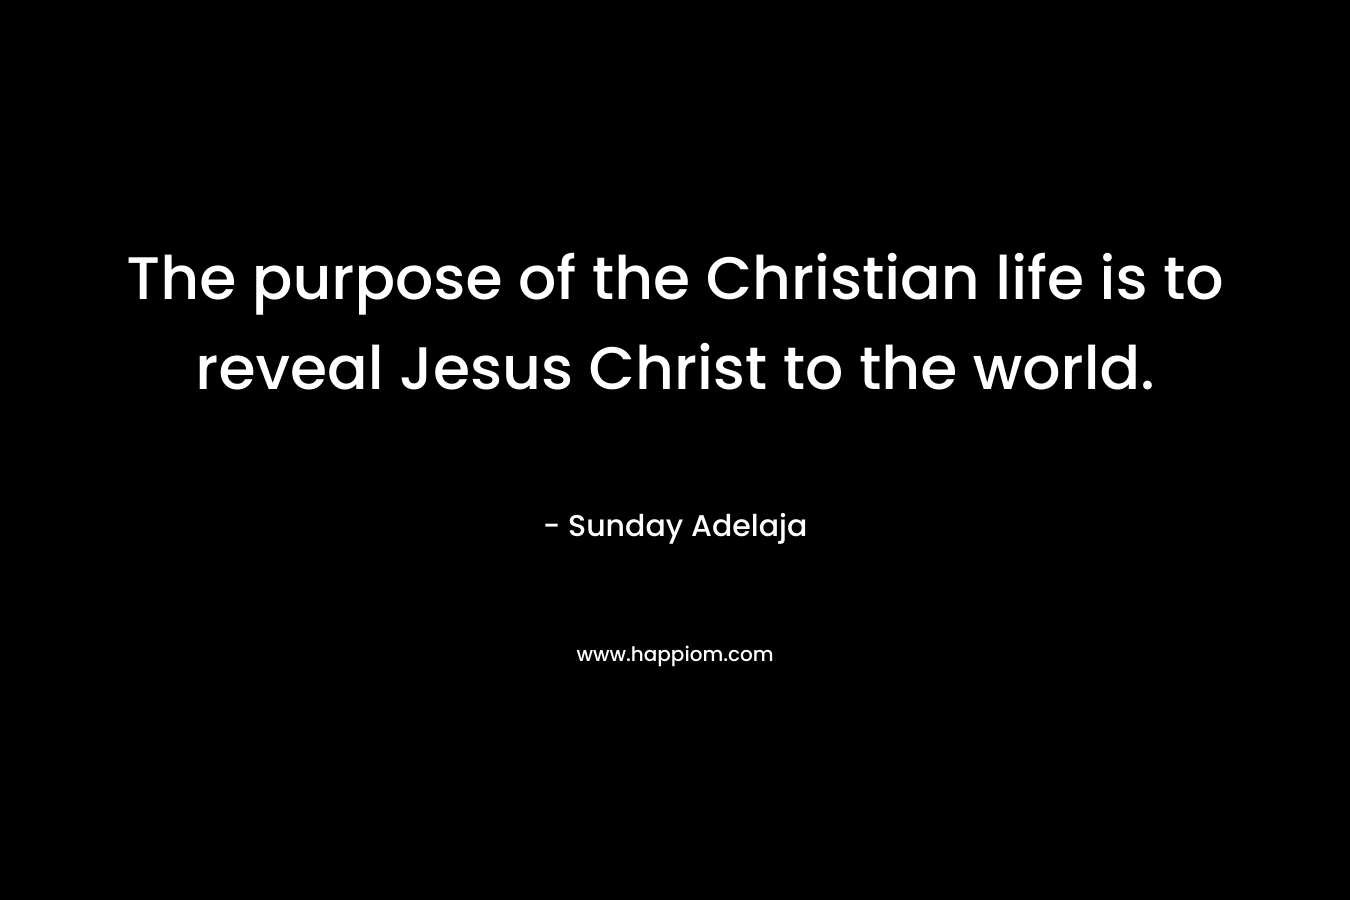 The purpose of the Christian life is to reveal Jesus Christ to the world.